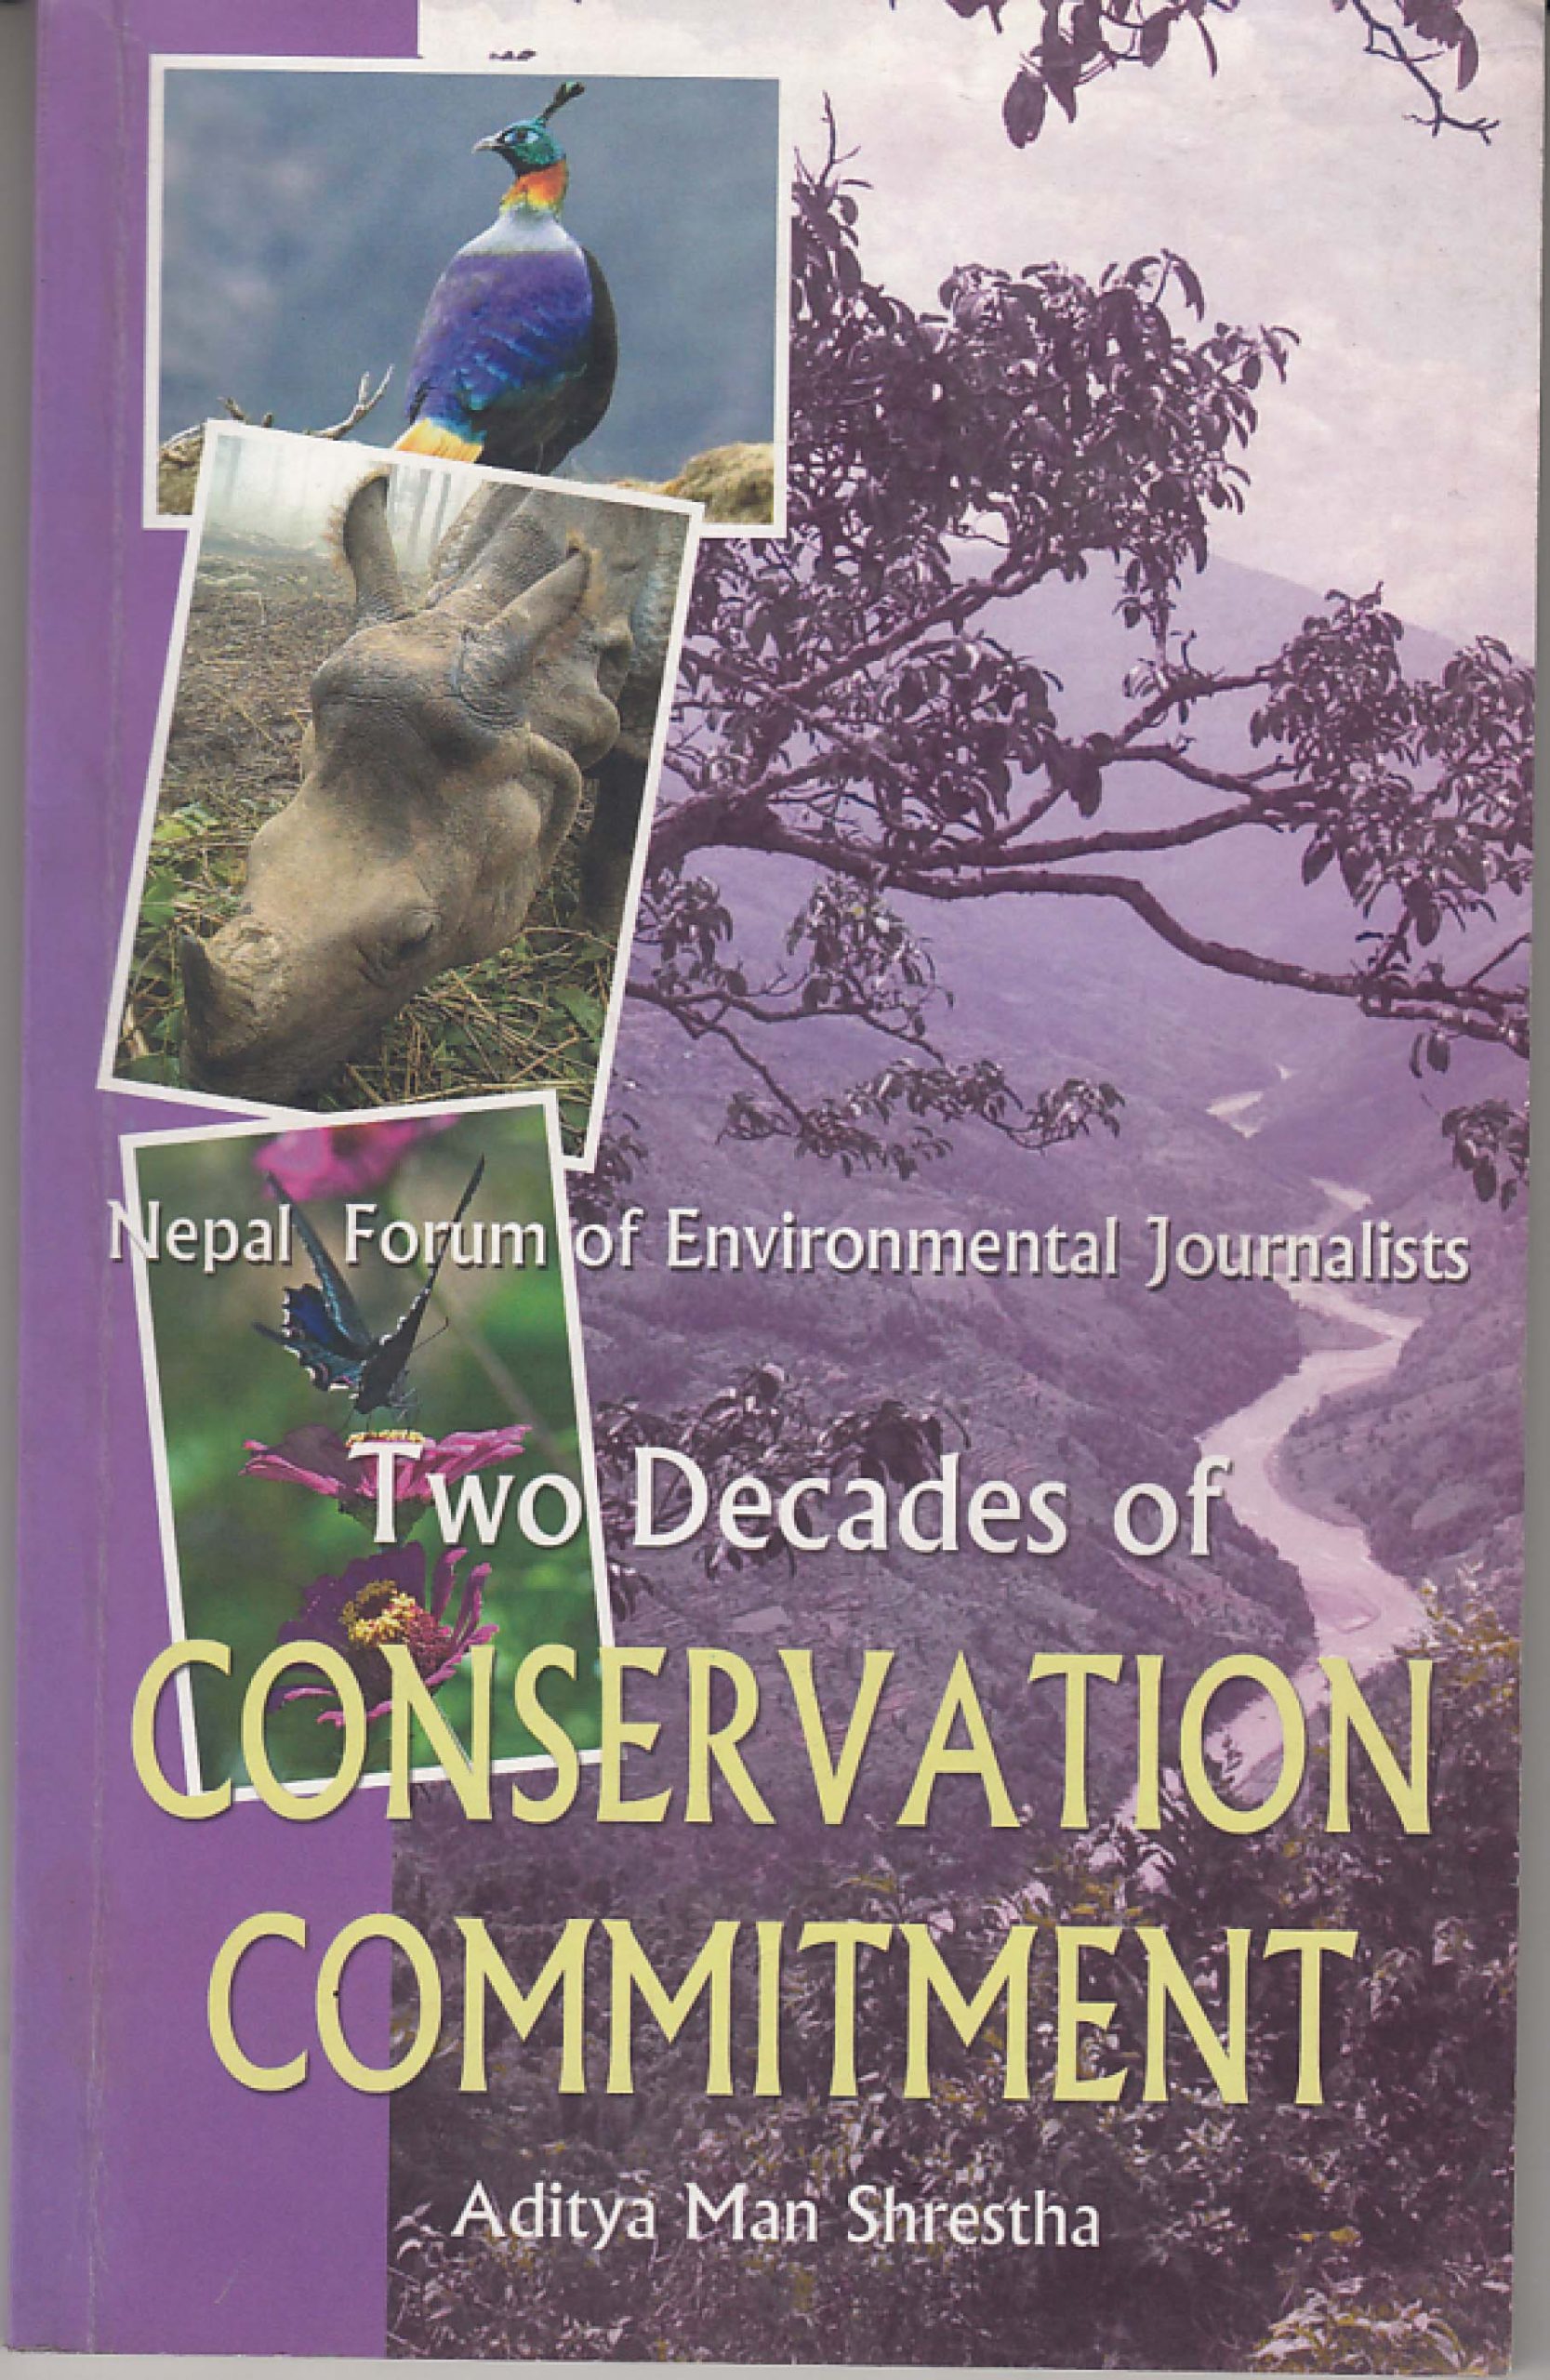 Two Decades of Conservation Commitment